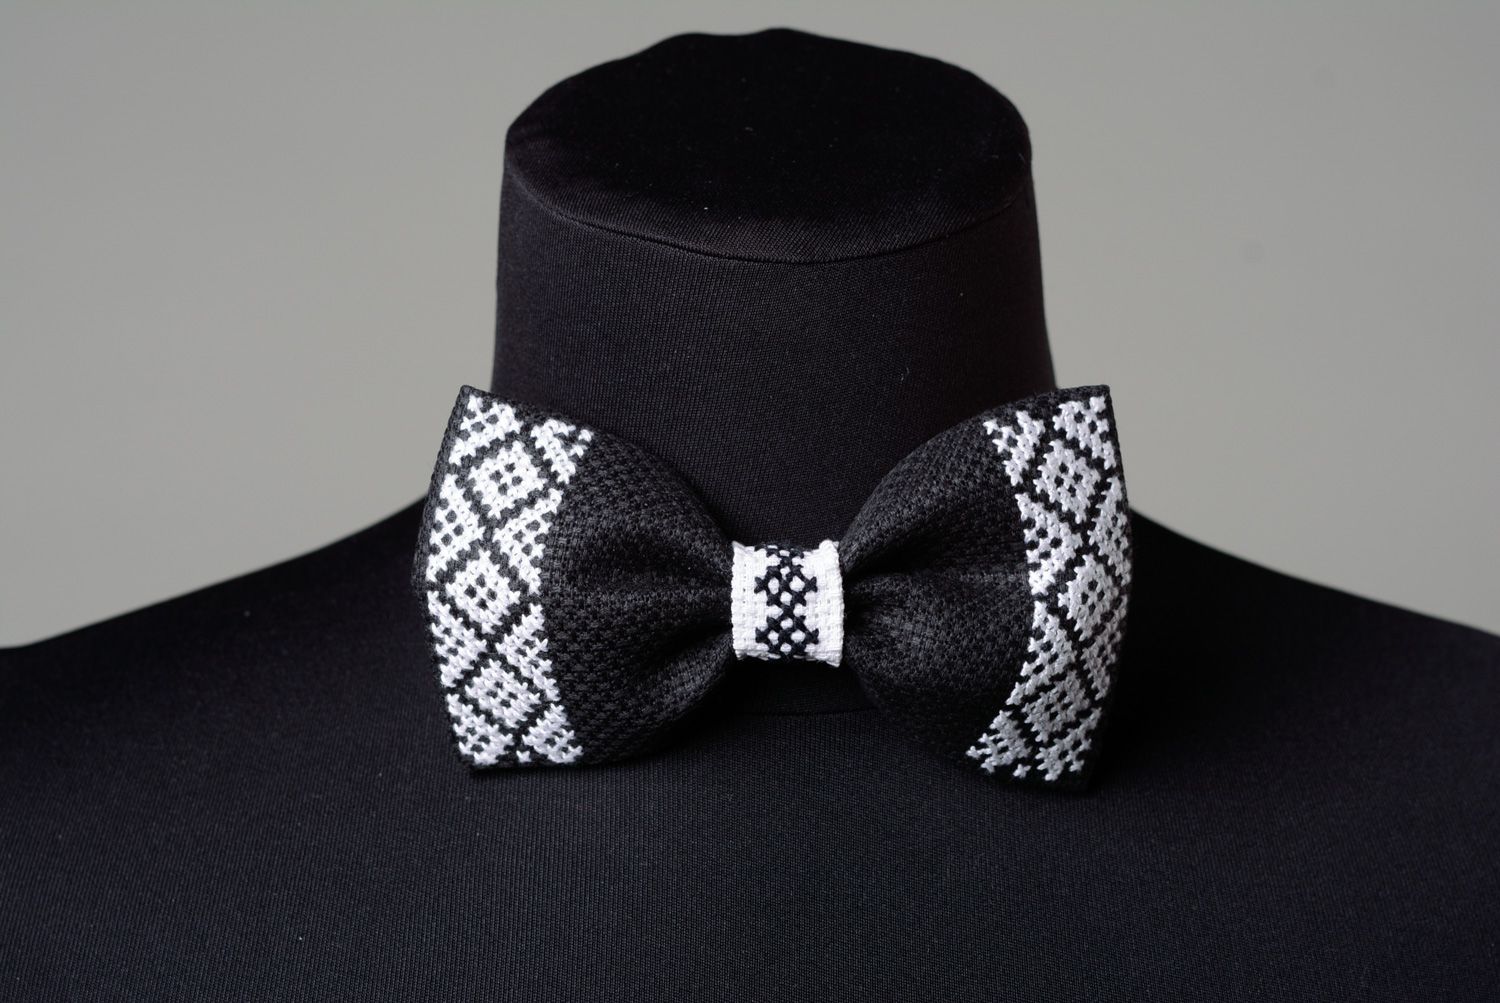 Handmade ethnic bow tie with cross stitch embroidery in black and white colors photo 1